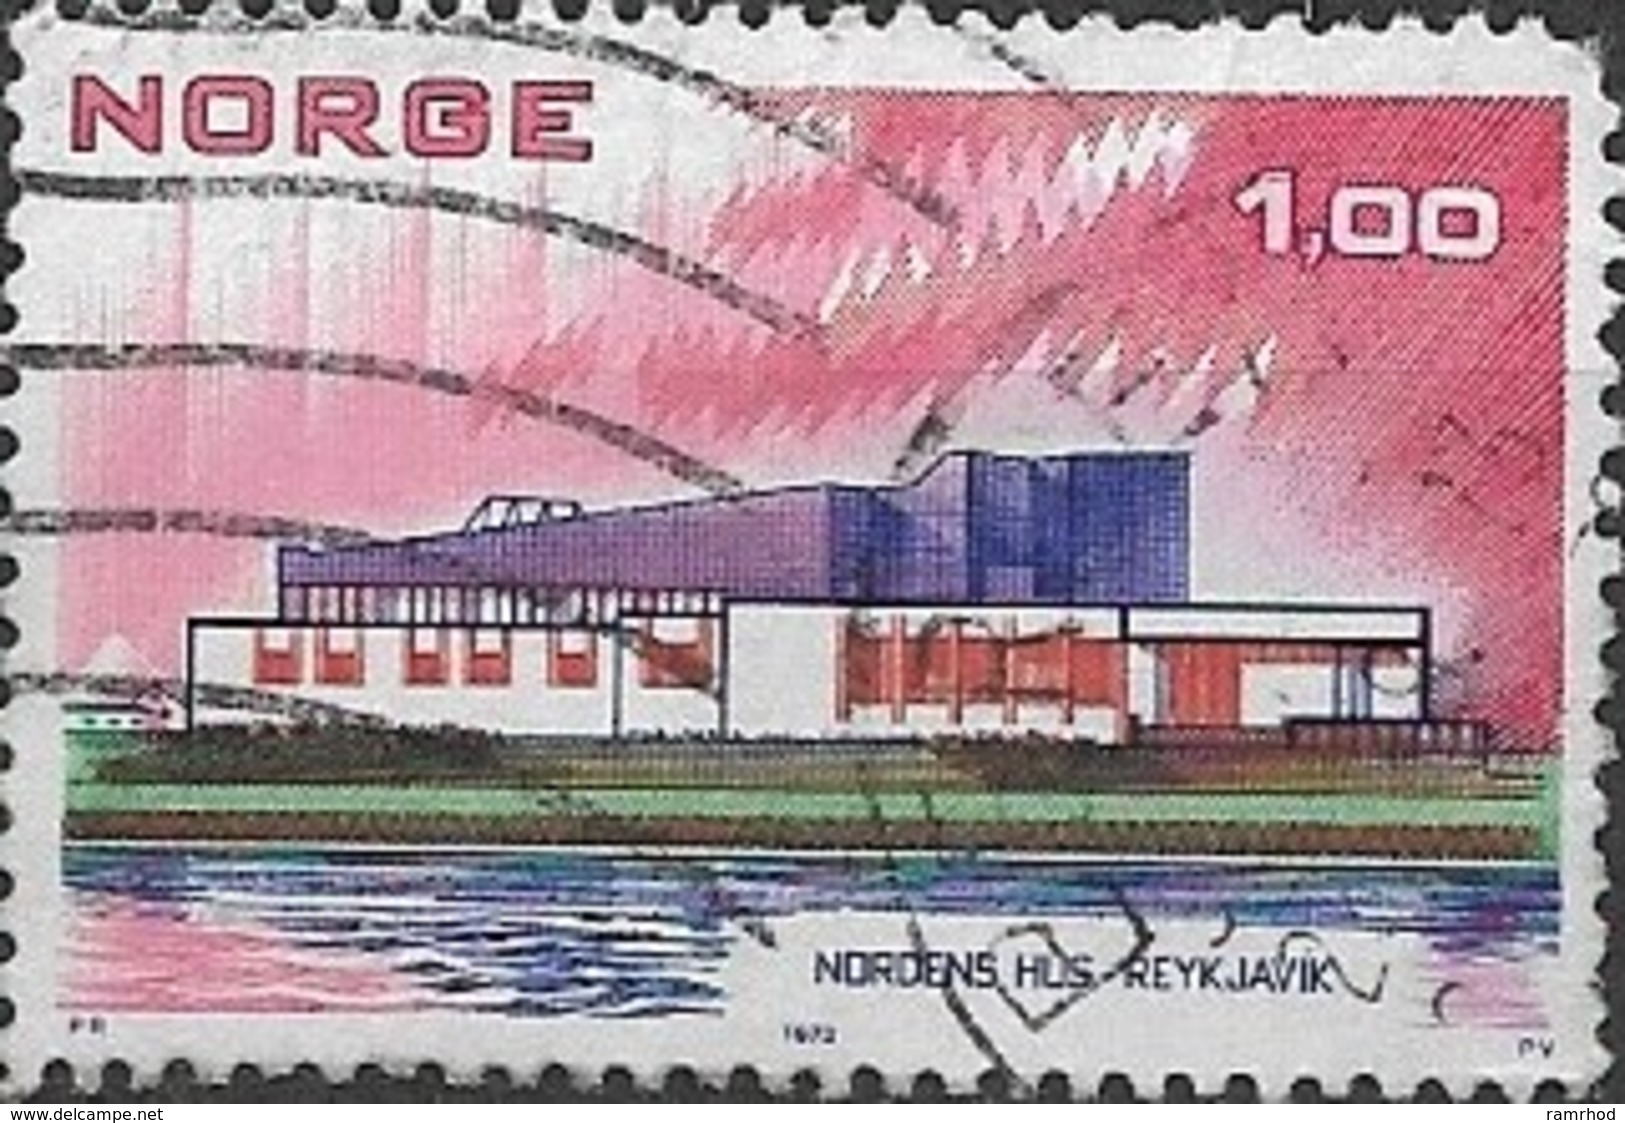 NORWAY 1973 Nordic Countries' Postal Co-operation - 1k The Nordic House, Reykjavik FU - Oblitérés